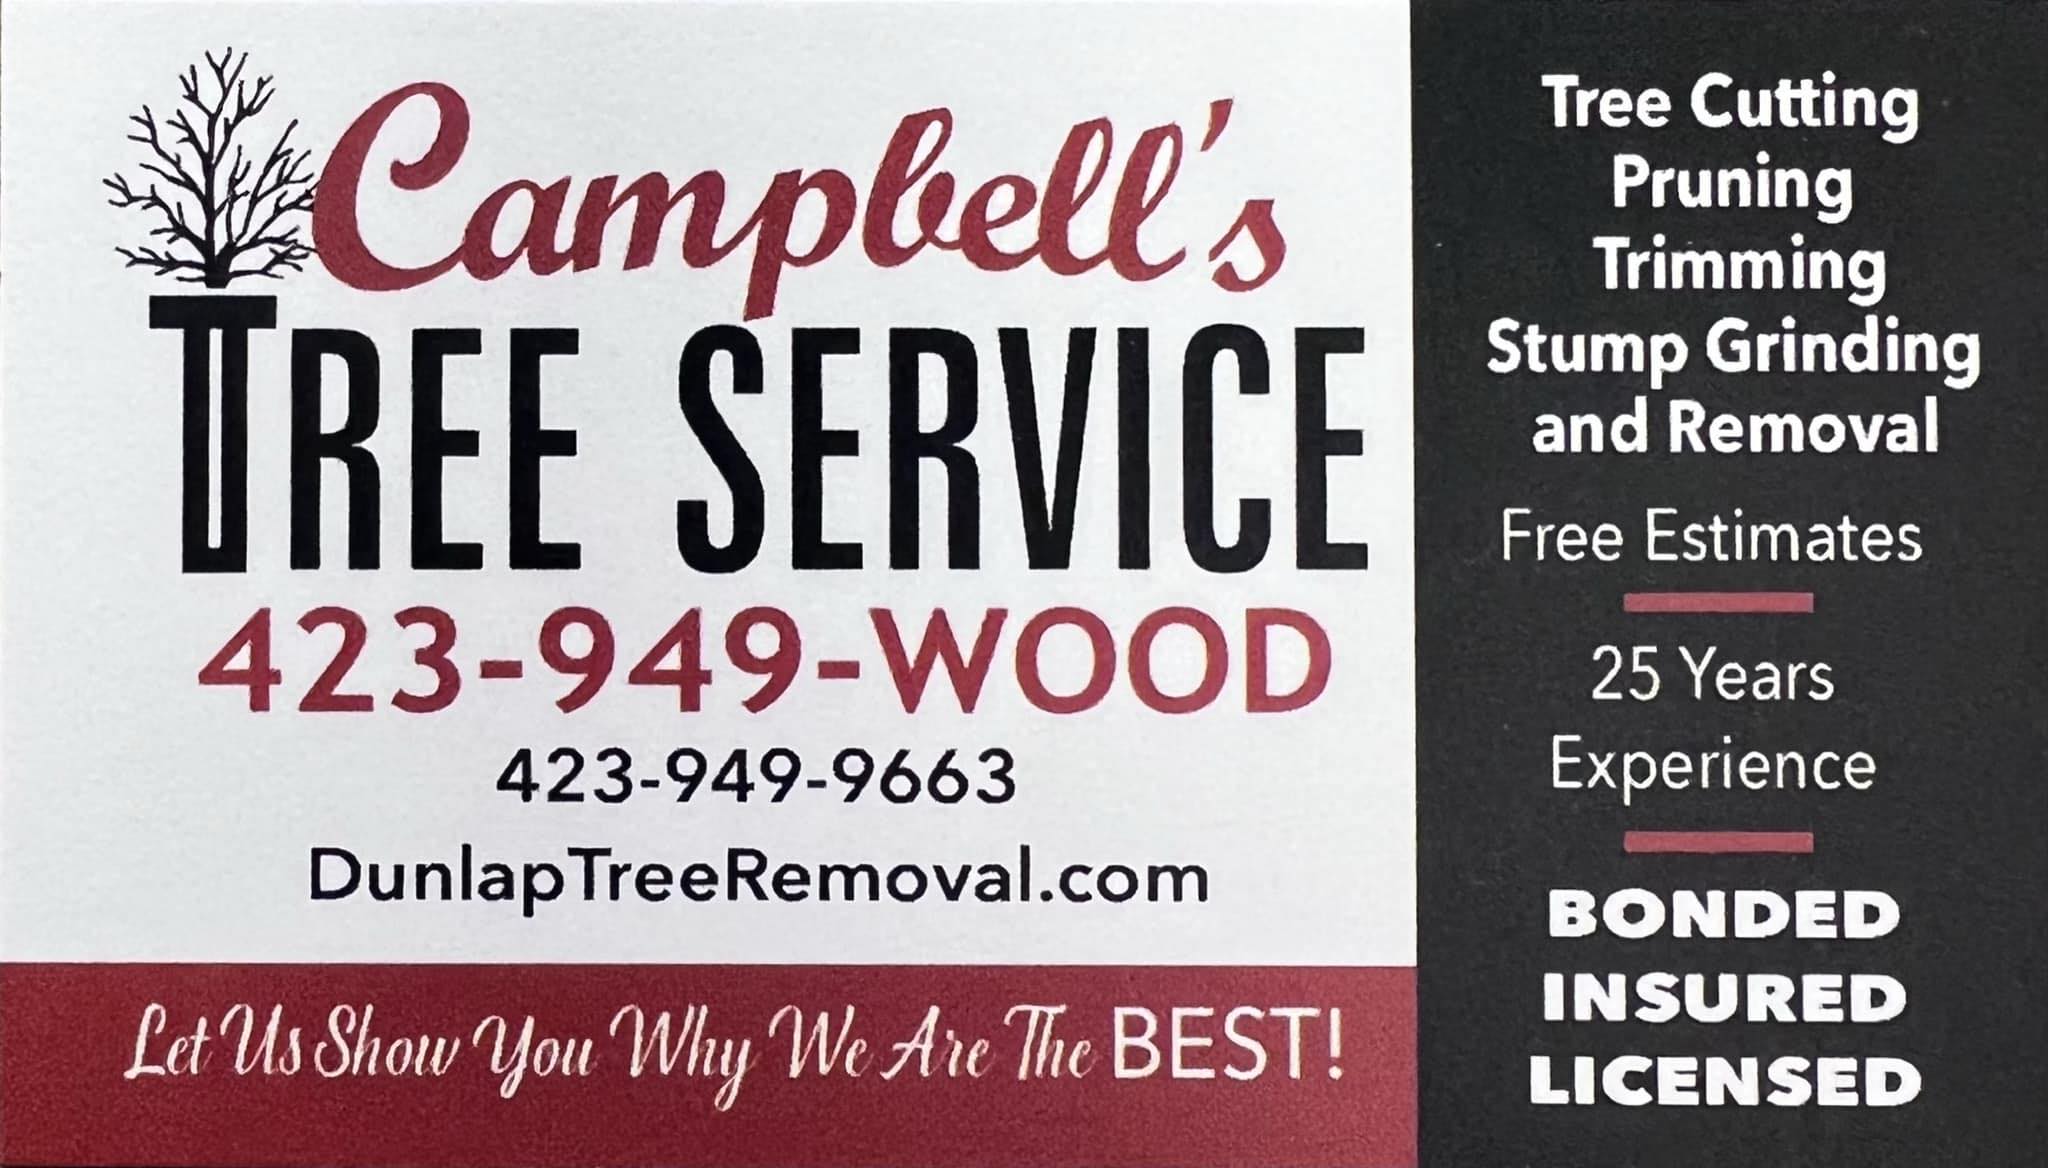 Campbell's Tree Service 15761 Rankin Ave, Dunlap Tennessee 37327